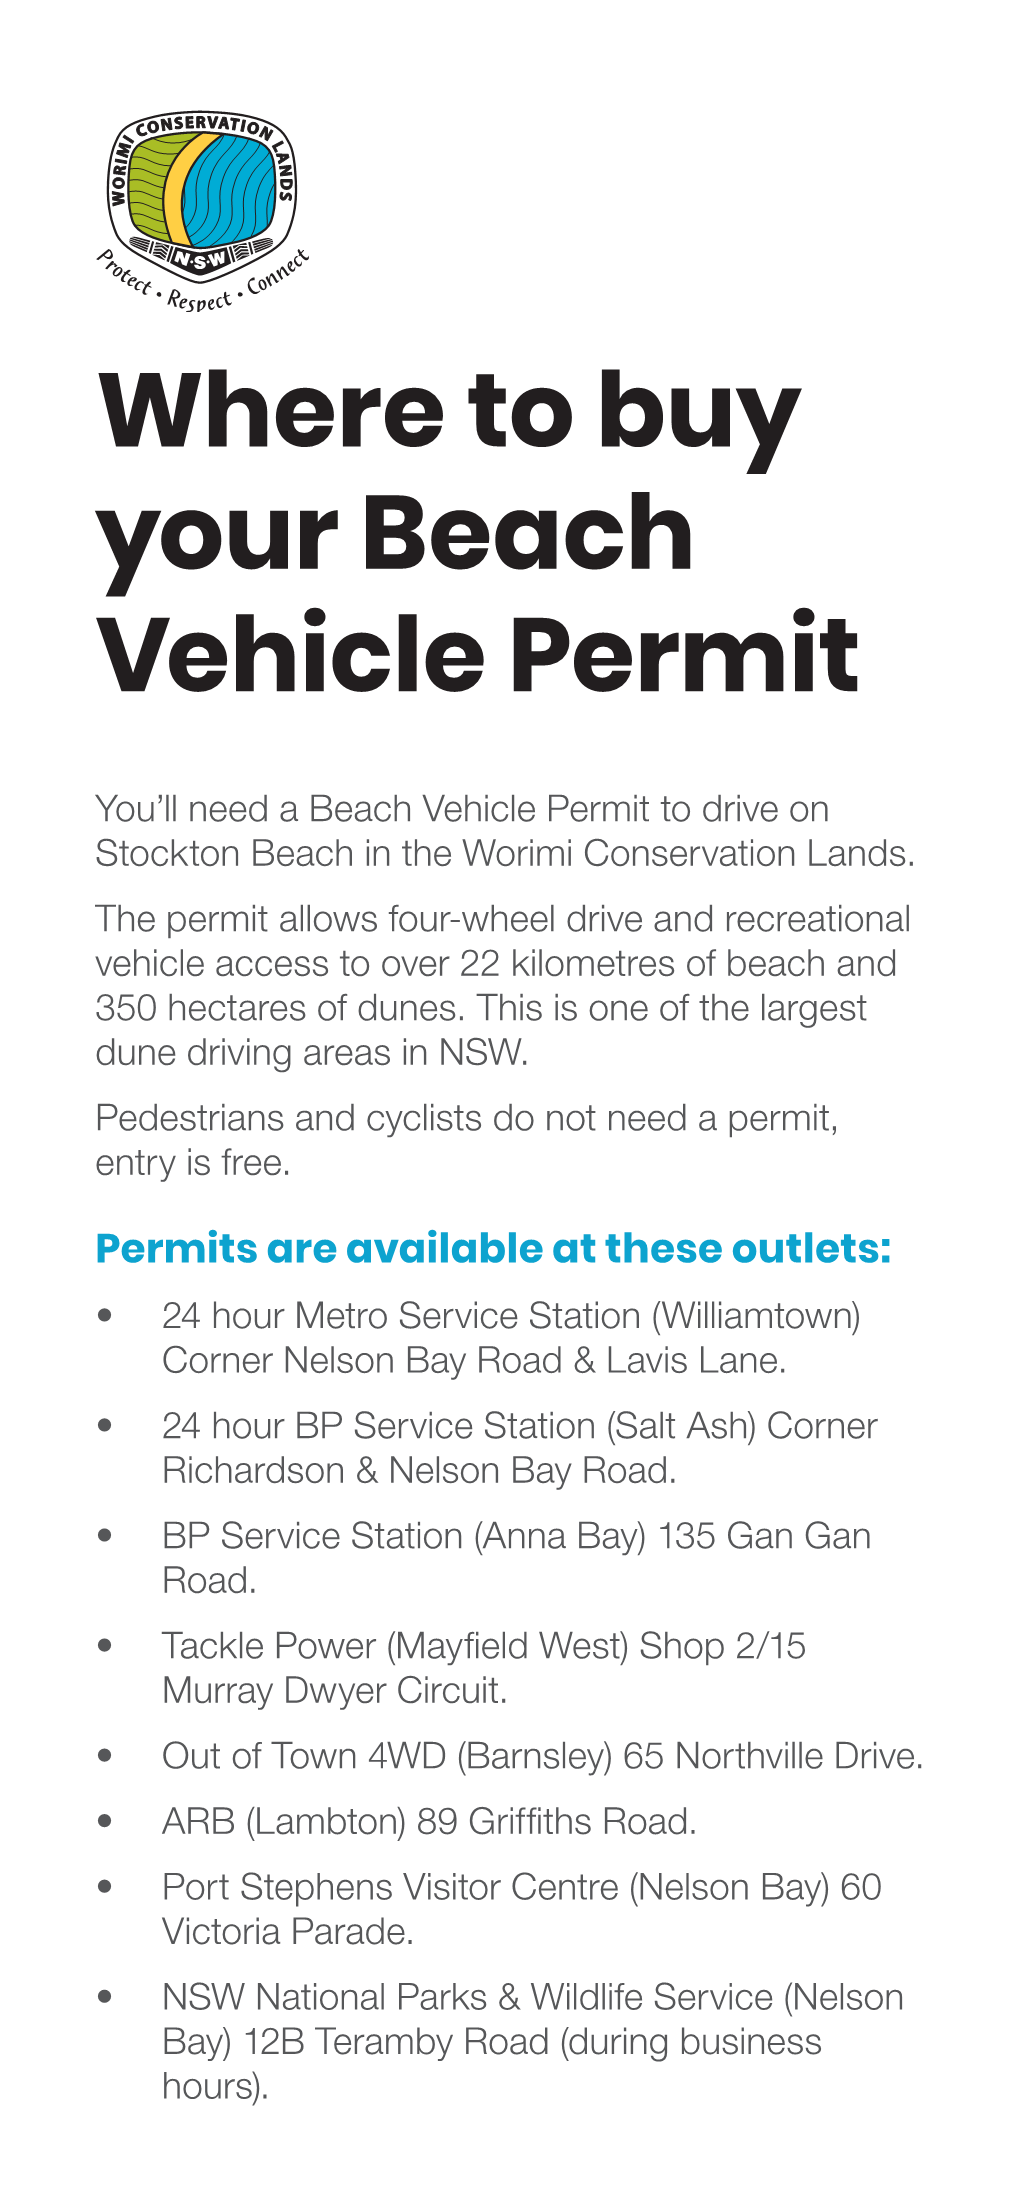 Where to Buy Your Beach Vehicle Permit